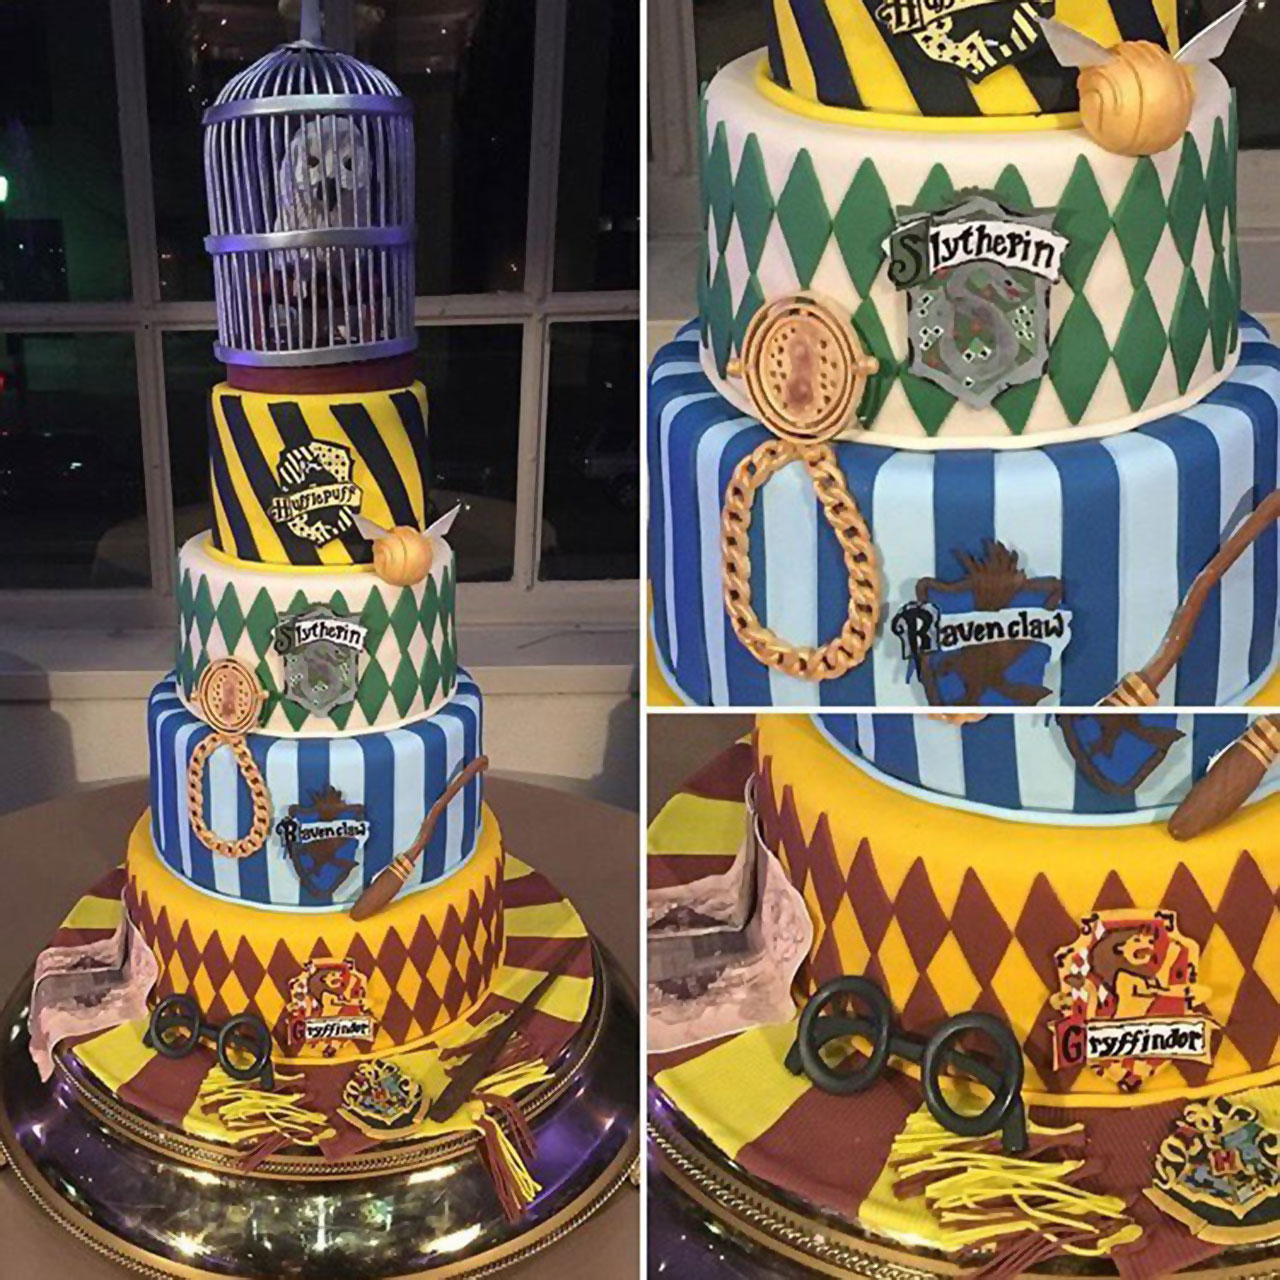 Mike Evans had a Harry Potter-themed Hogwarts cake at his wedding